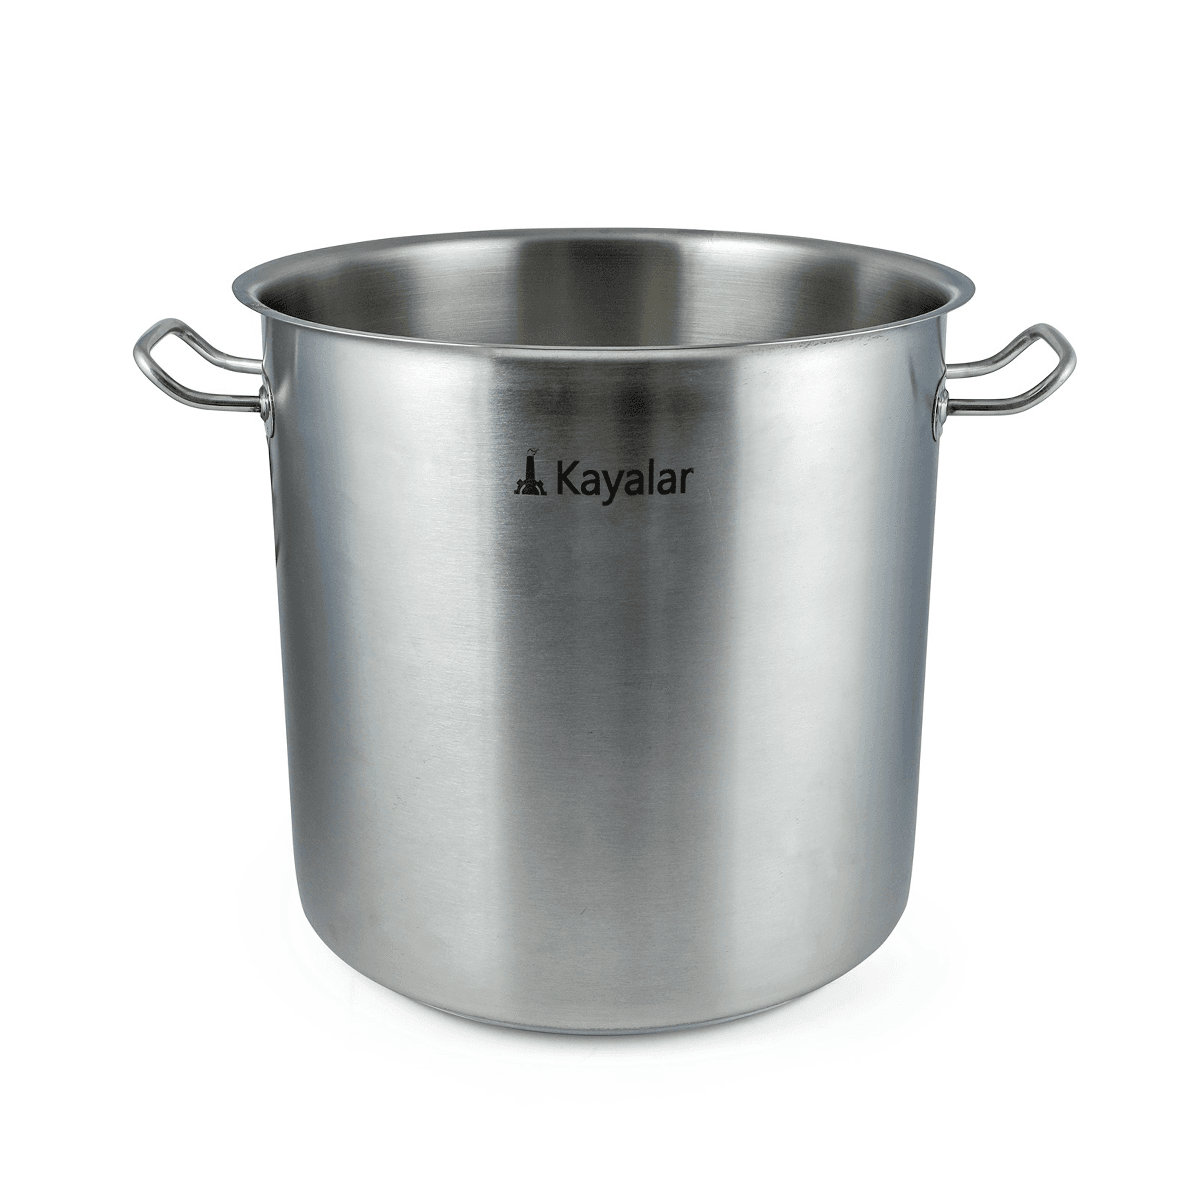 Kayalar Stainless Steel Stew Pot Deep with Out Lid 69 Liter Silver Stainless Steel